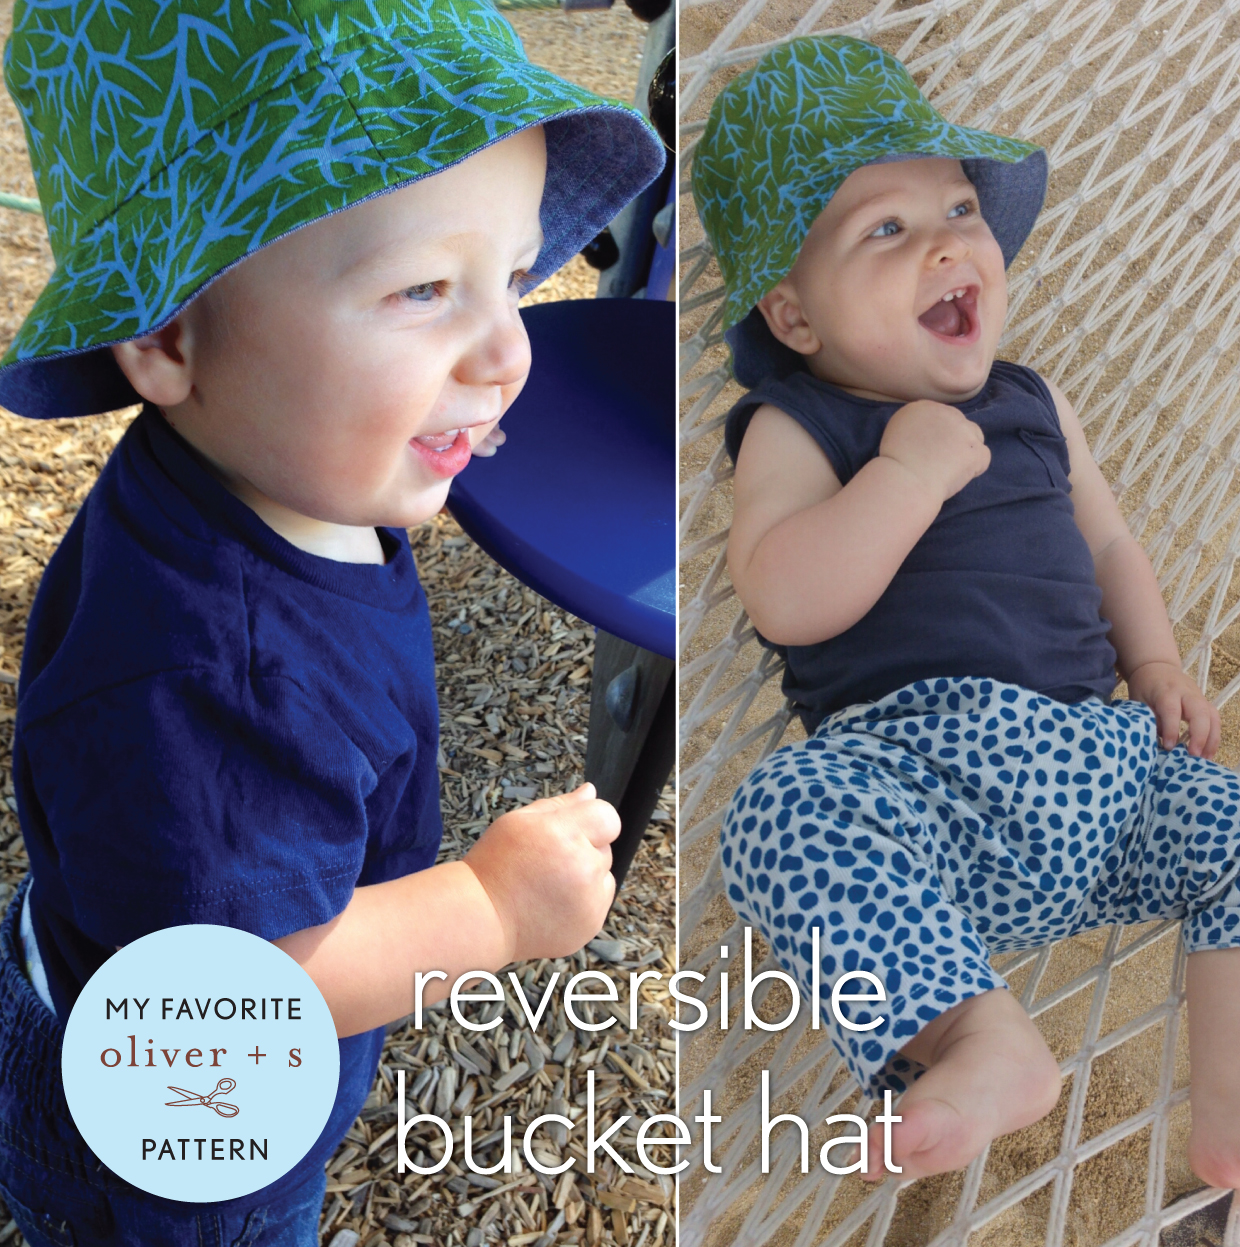 My Favorite Oliver + S Pattern: Genevieve From the Orla Project, Blog